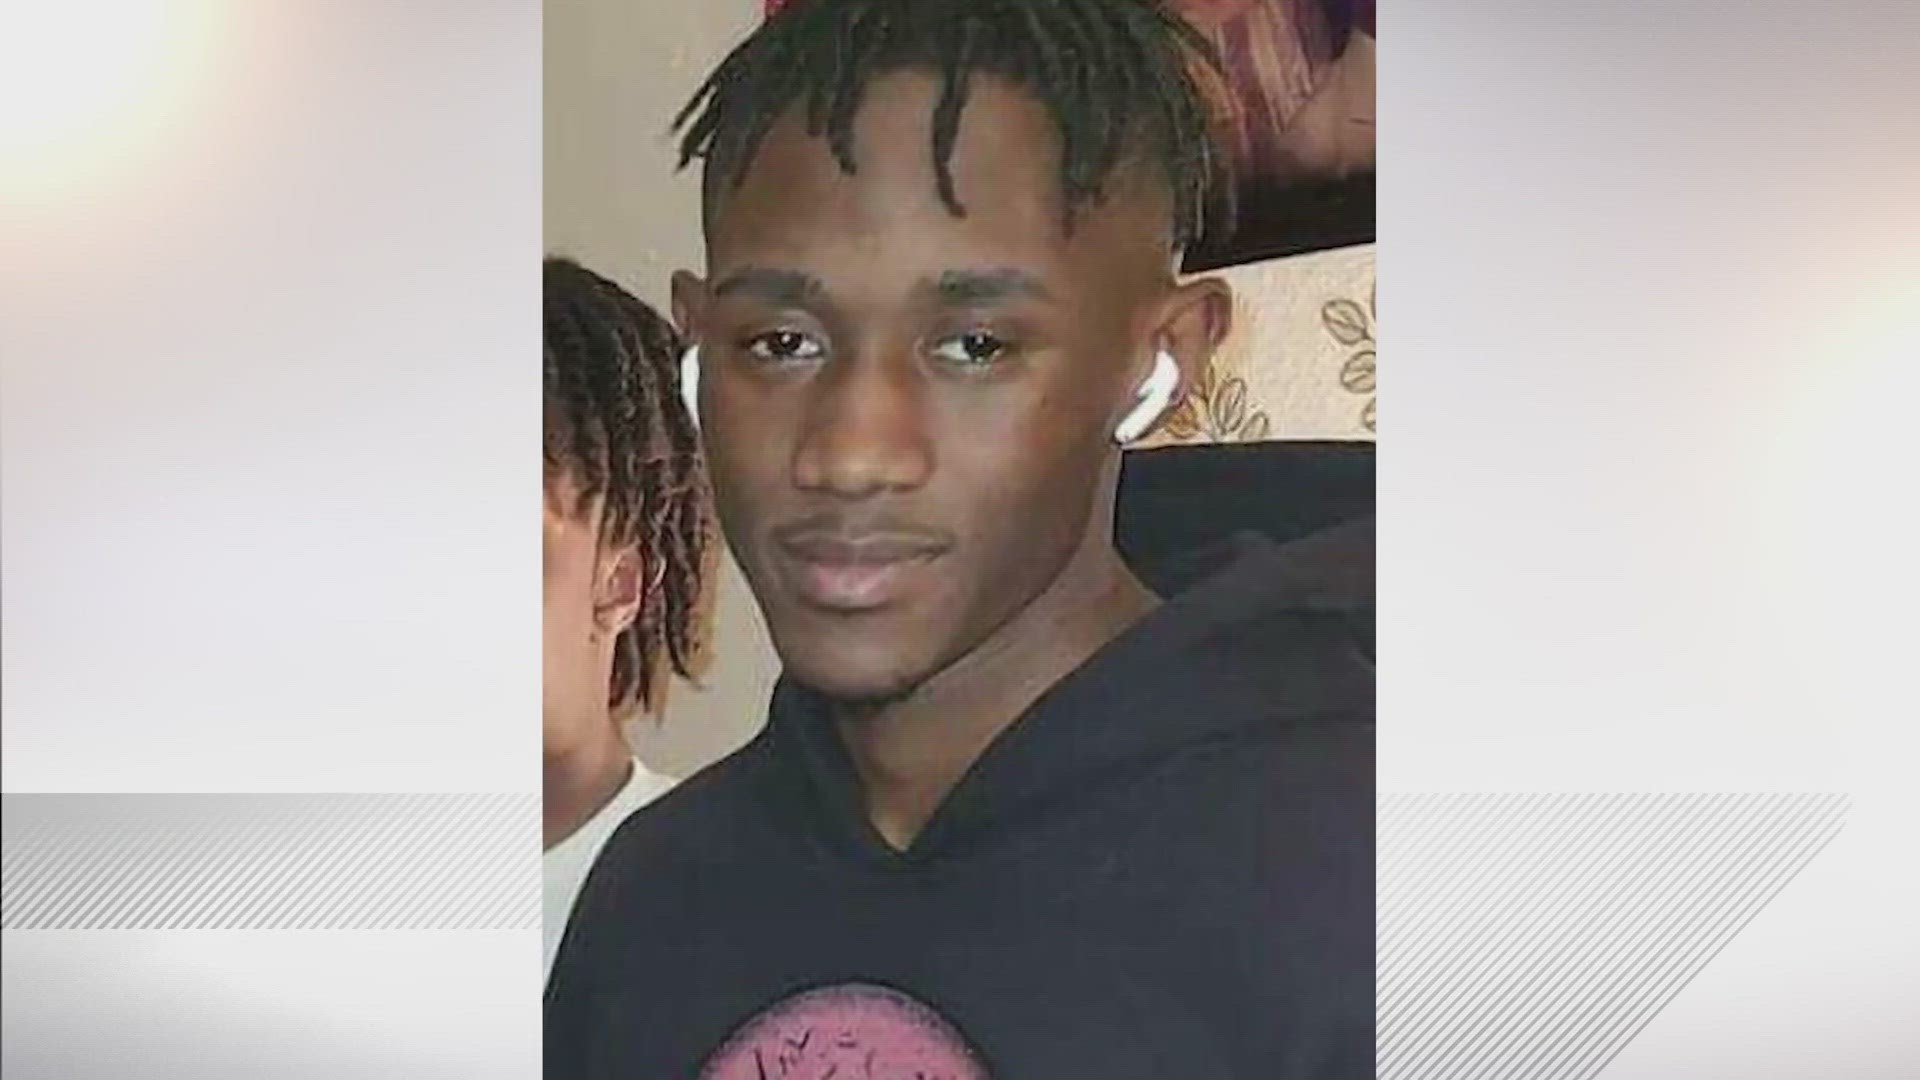 DeAngelo Phillip Jackson, 19, of Navasota, is described as being 6 feet 3 inches tall and was wearing black shorts.